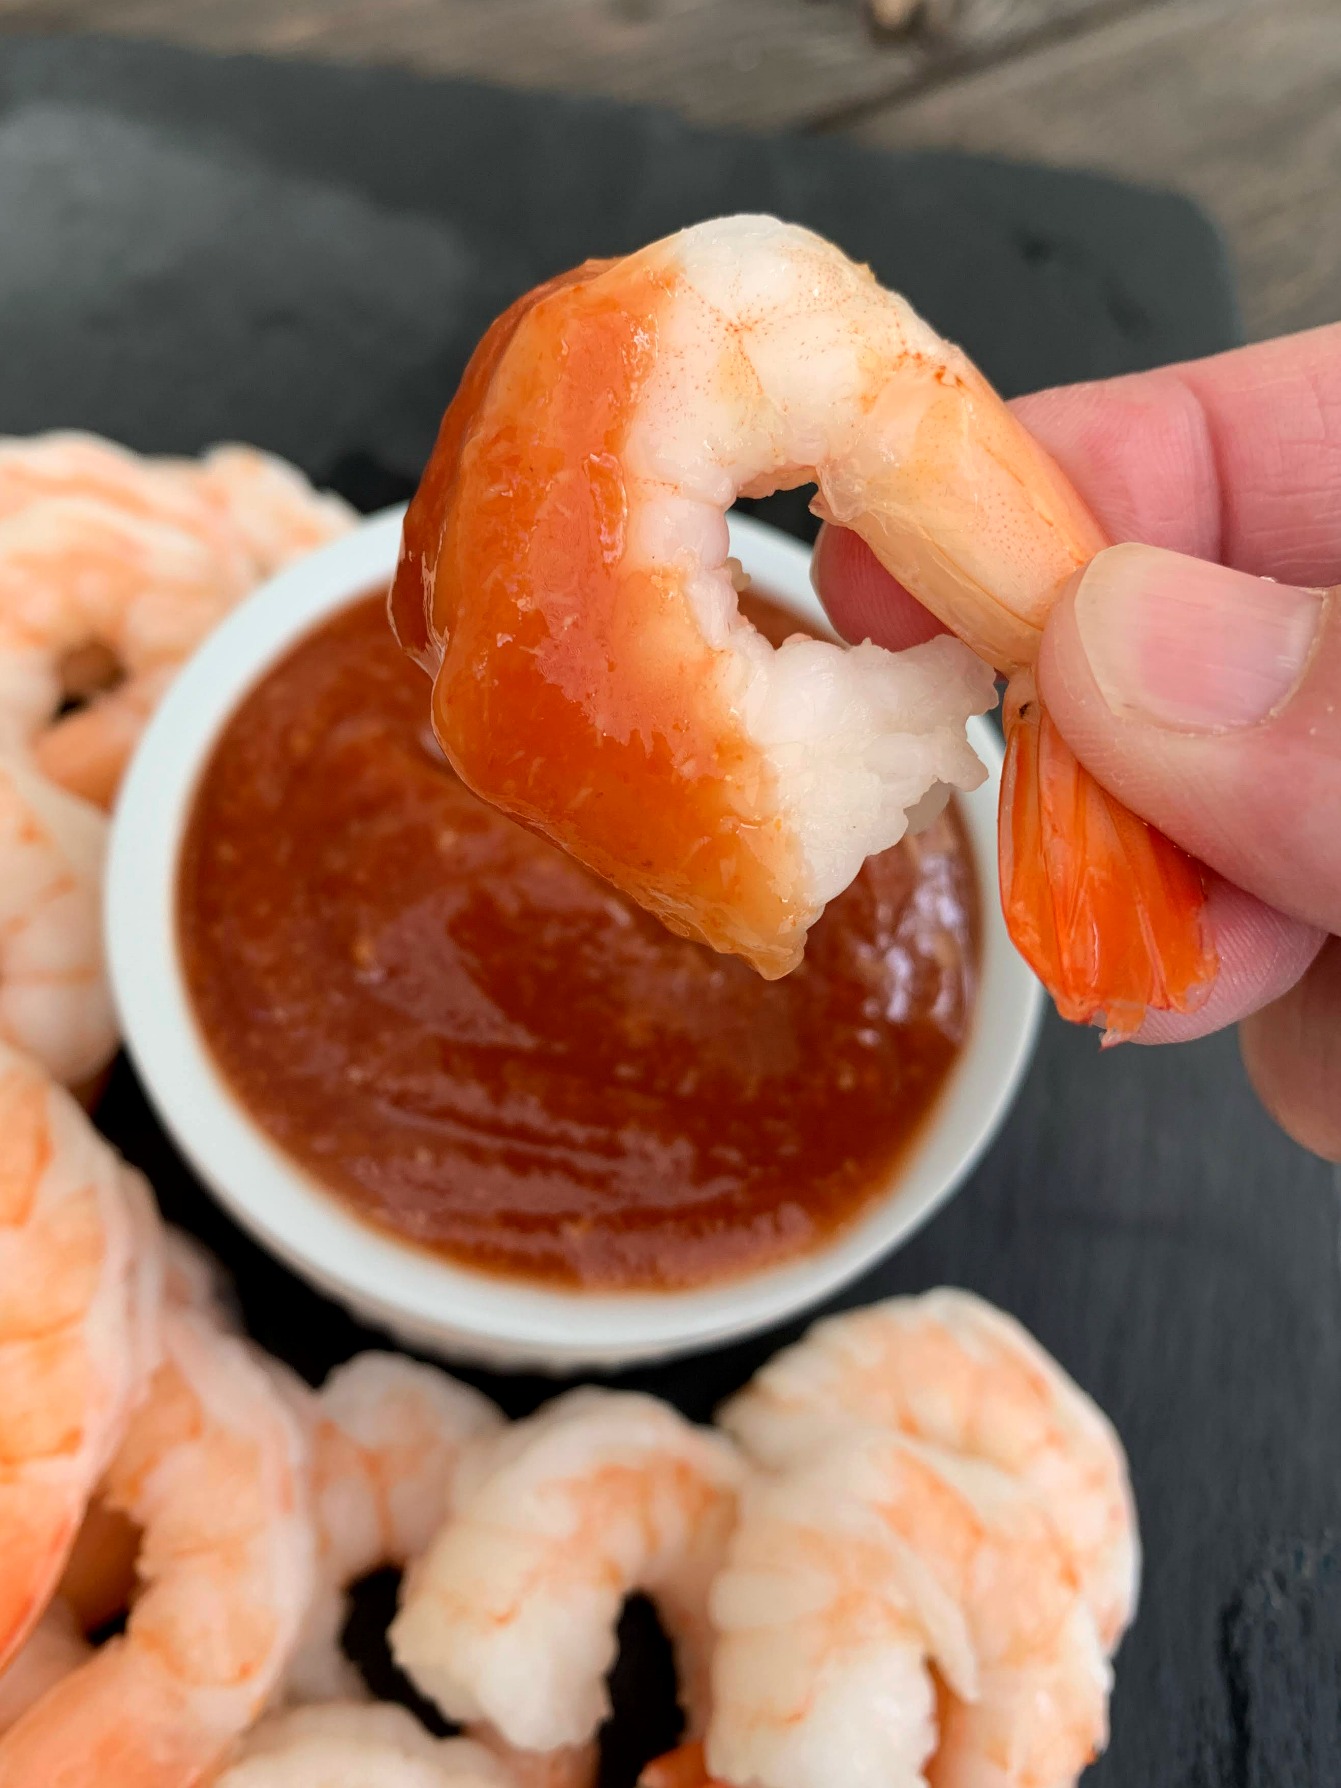 a shrimp being held in the air after dipping it in cocktail sauce